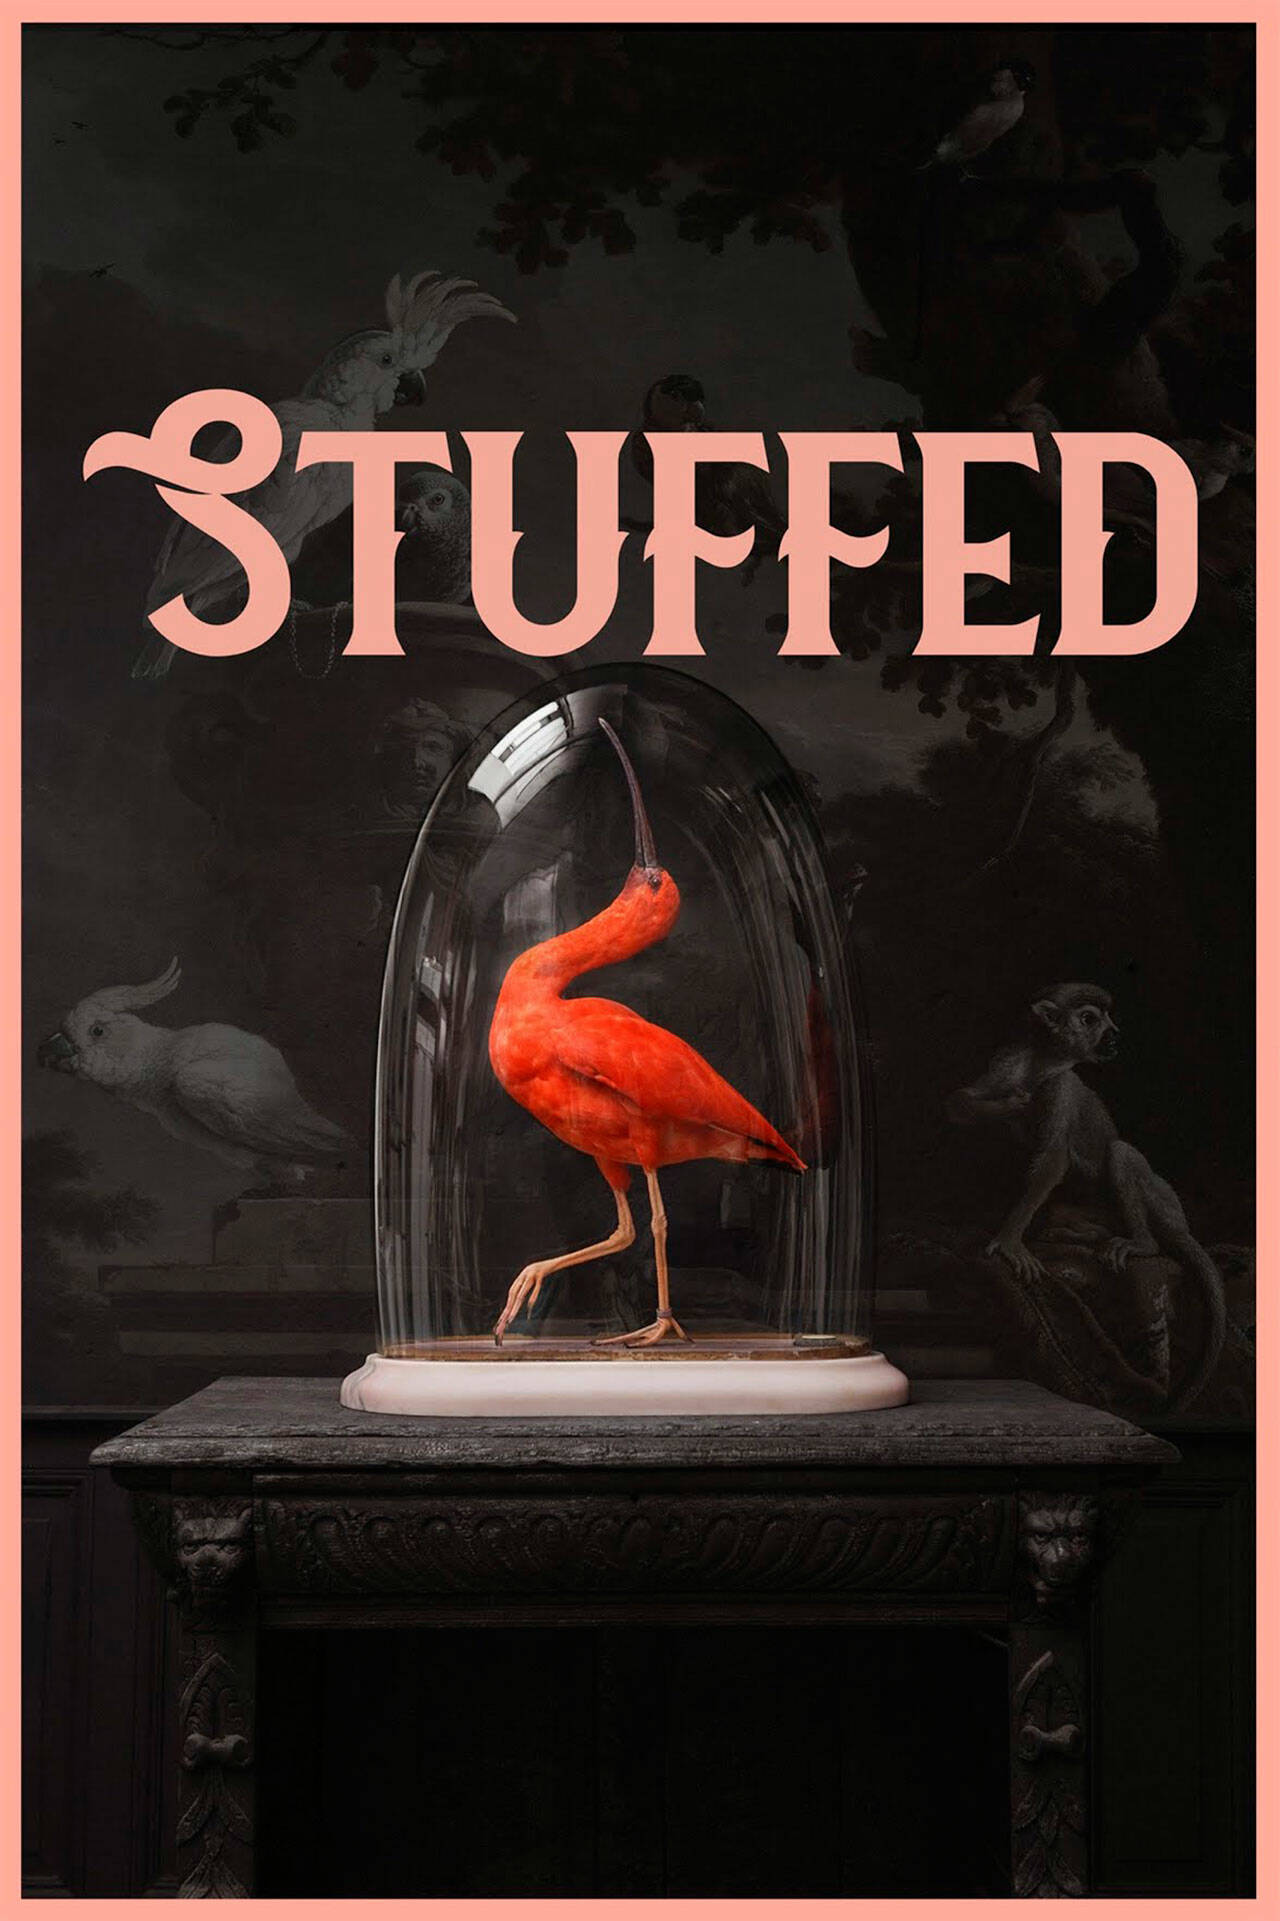 Image courtesy Dungeness River Nature Center/ “Stuffed: A Documentary on the Art of Taxidermy” screens at 6:30 p.m. Thursday, Sept. 14, in the River Center’s Rainshadow Hall, 1943 West Hendrickson Road, Sequim.